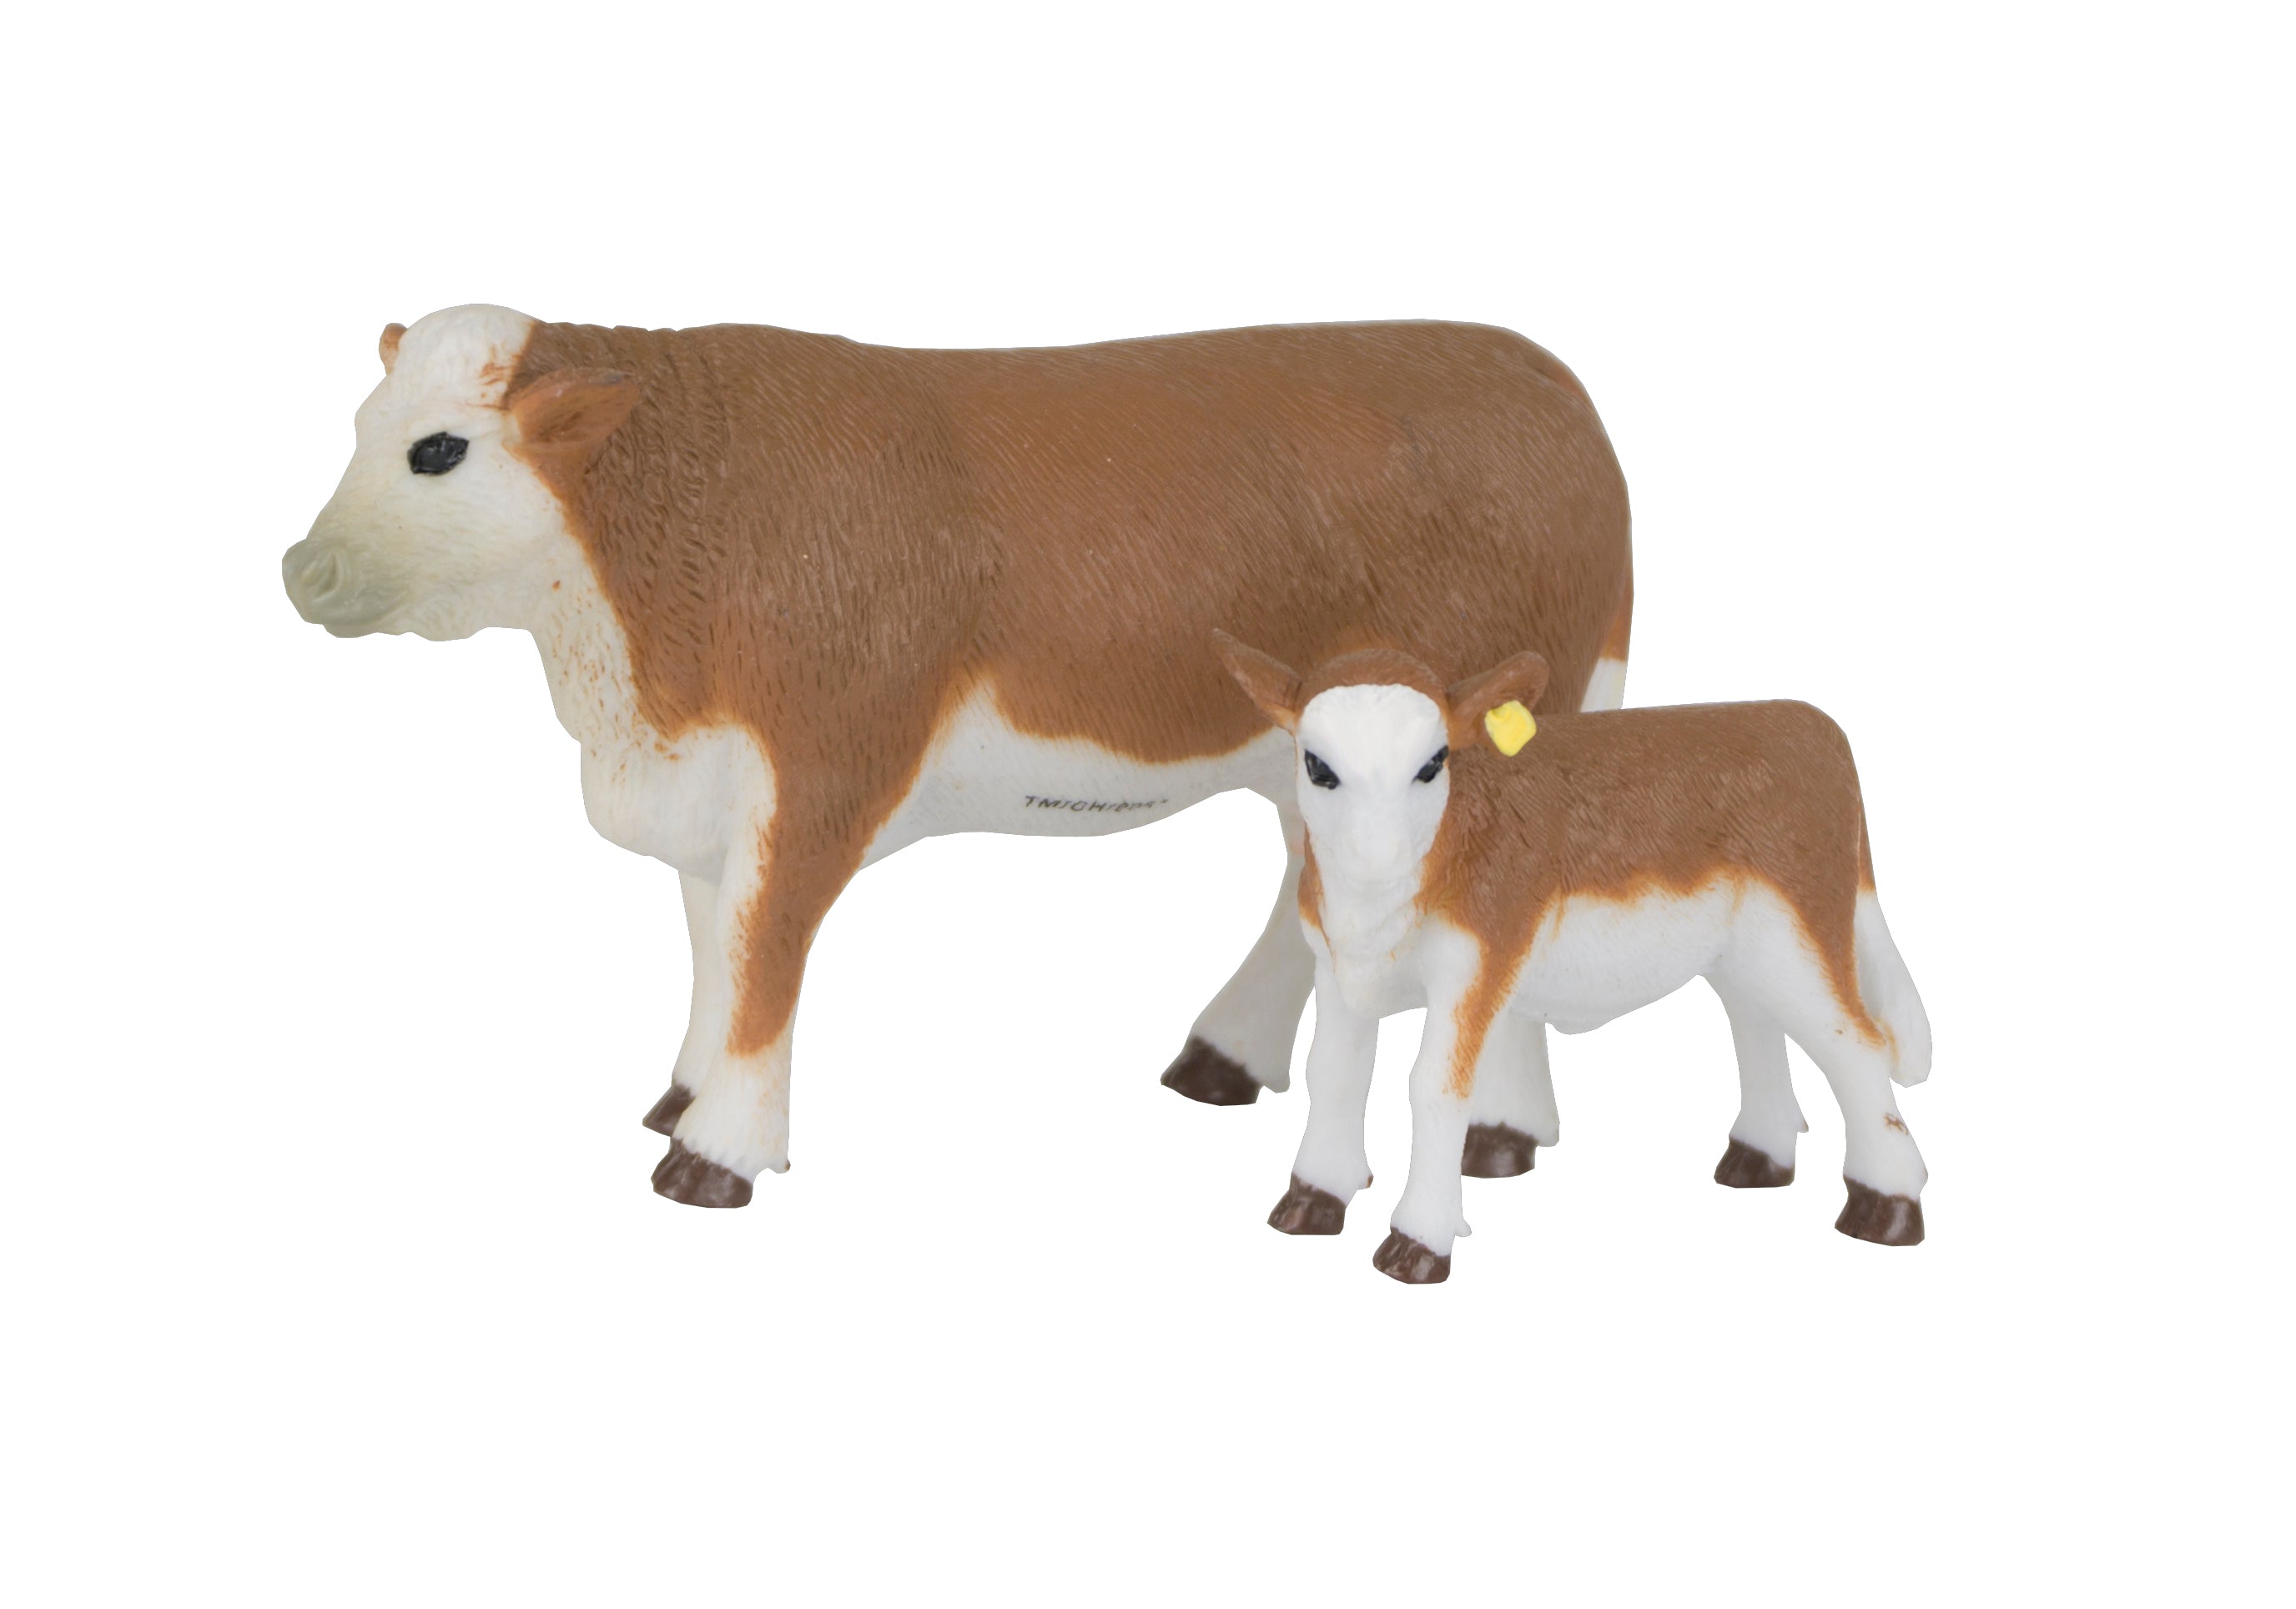 Hereford Cow & Calf